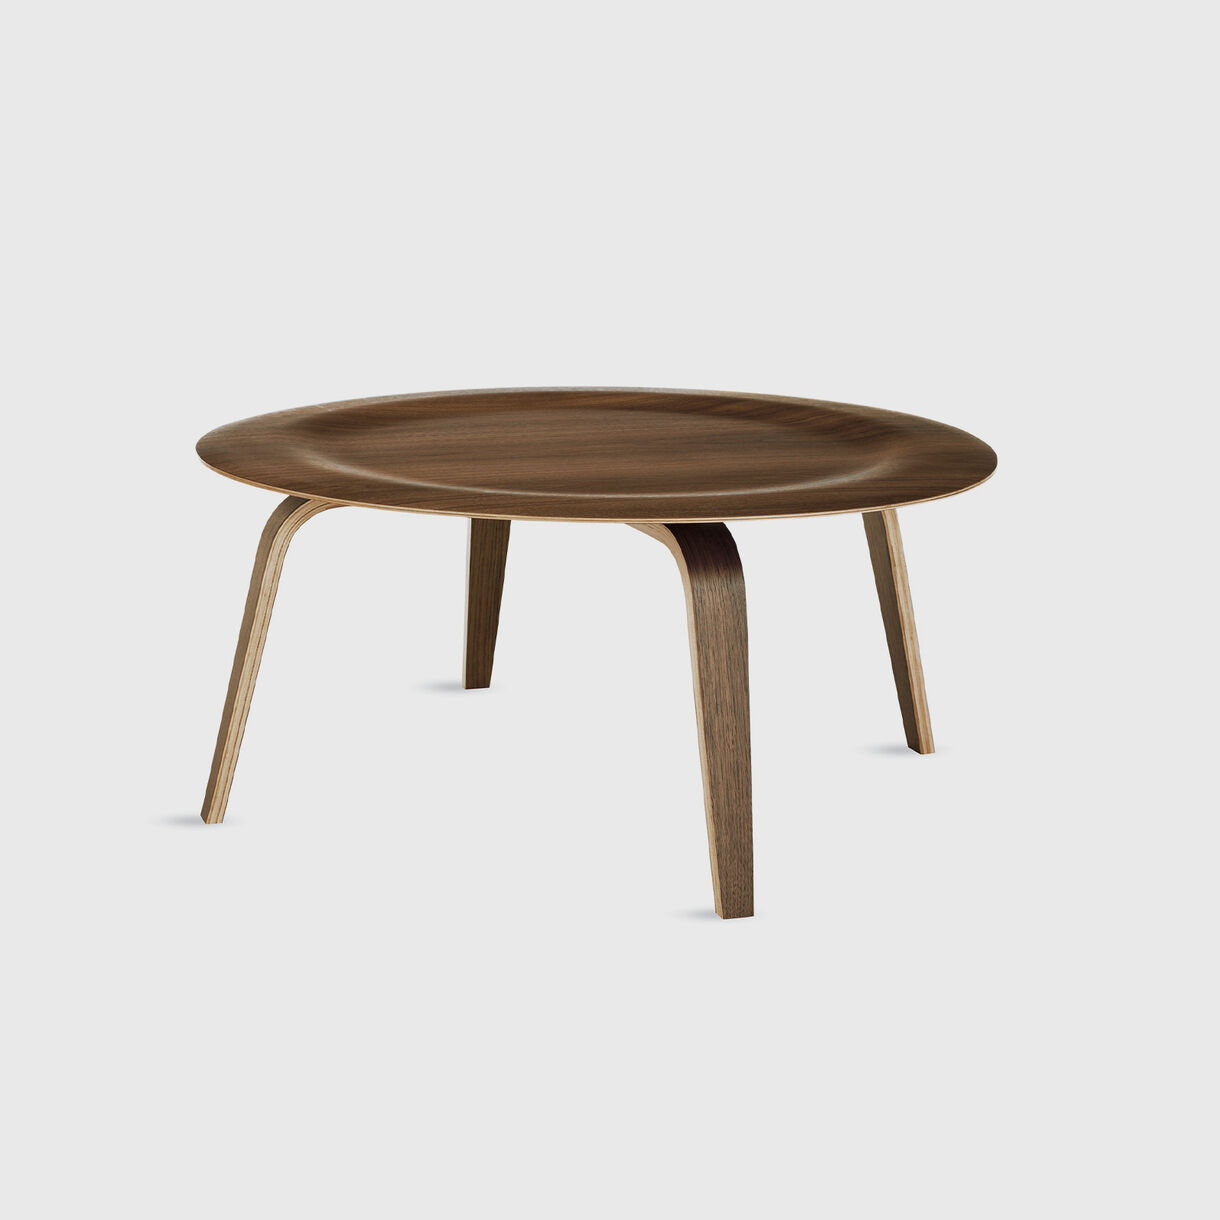 Eames Moulded Plywood Coffee Table, Wood Base, Walnut